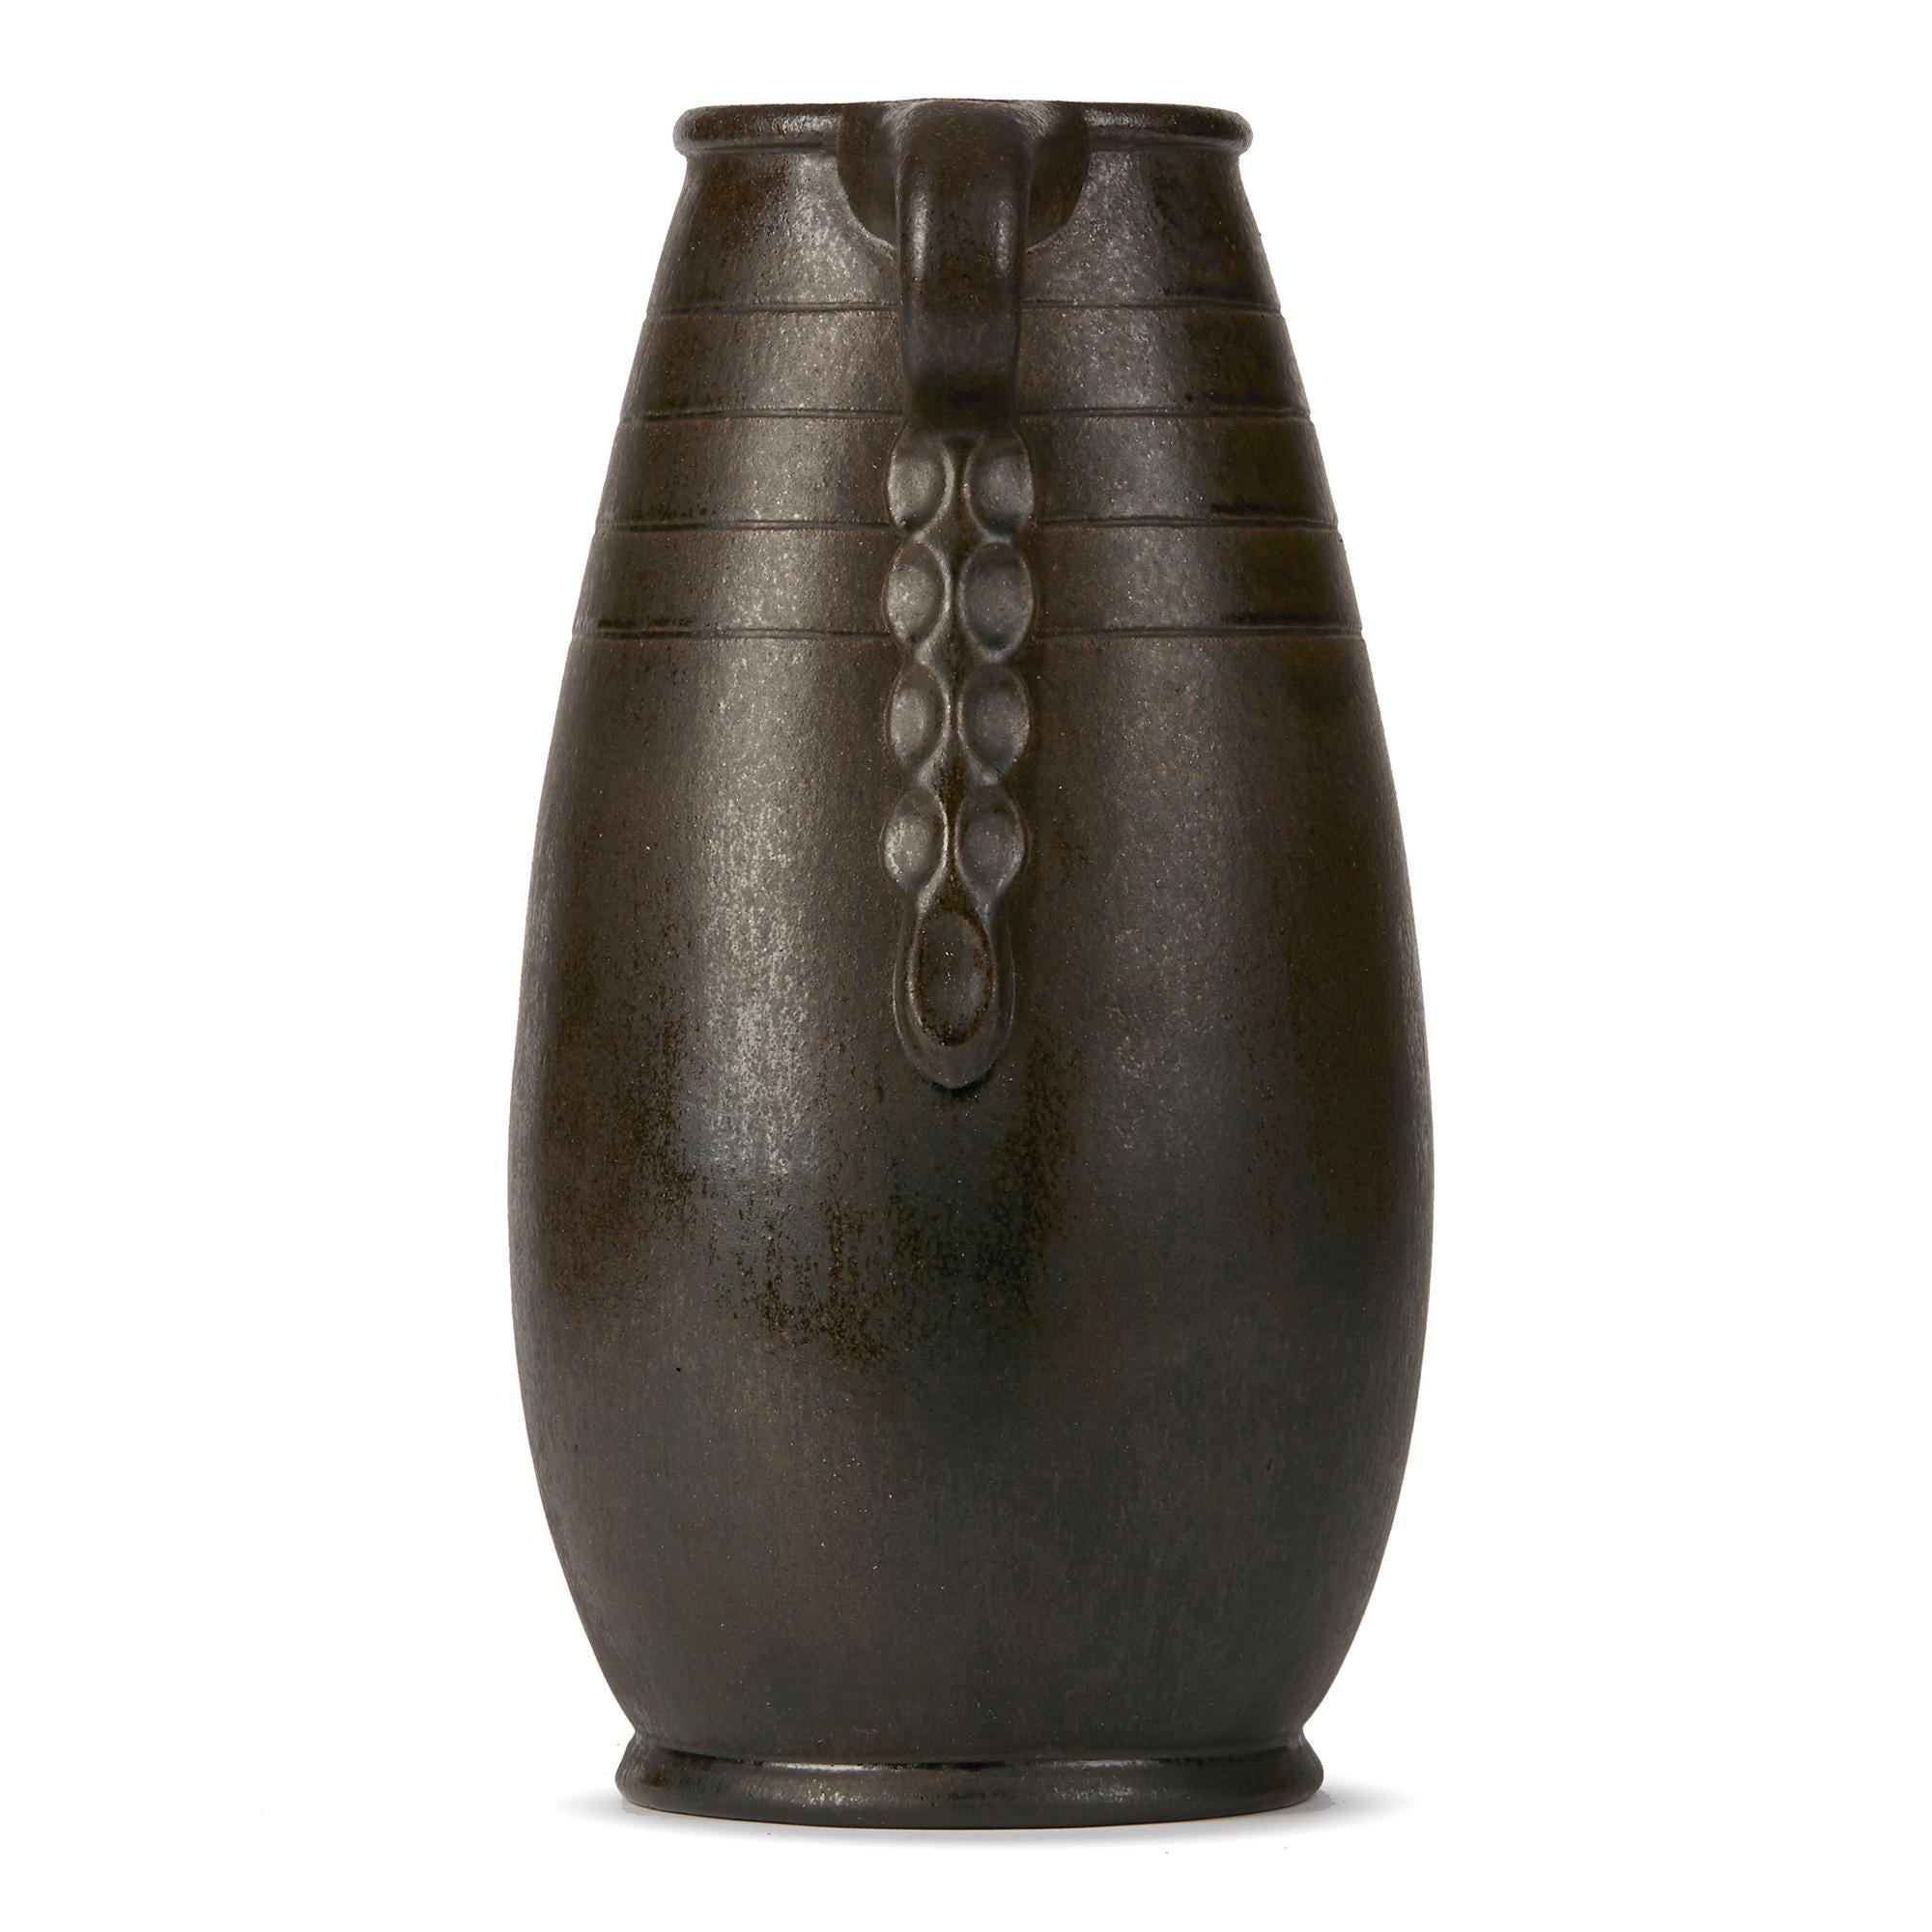 PLEASE NOTE: This piece is currently located in our Amsterdam office, please enquire for delivery times. 

A large and impressive art pottery twin handled vase by renowned Dutch master potter and sculptor Willem Coenraad Brouwer. This stylish